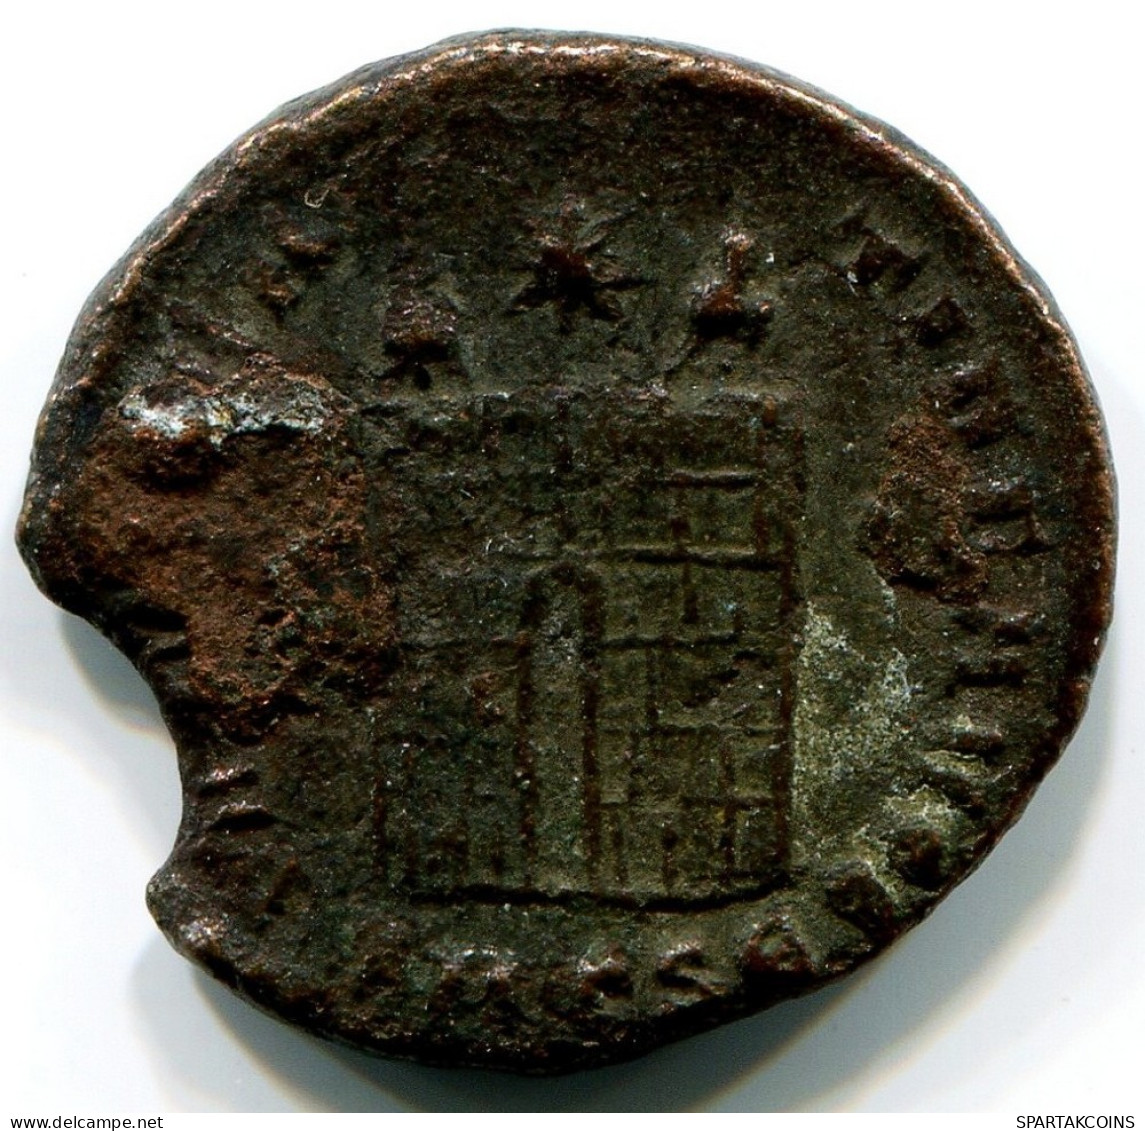 CONSTANTINE I MINTED IN THESSALONICA FOUND IN IHNASYAH HOARD #ANC11134.14.D.A - The Christian Empire (307 AD To 363 AD)